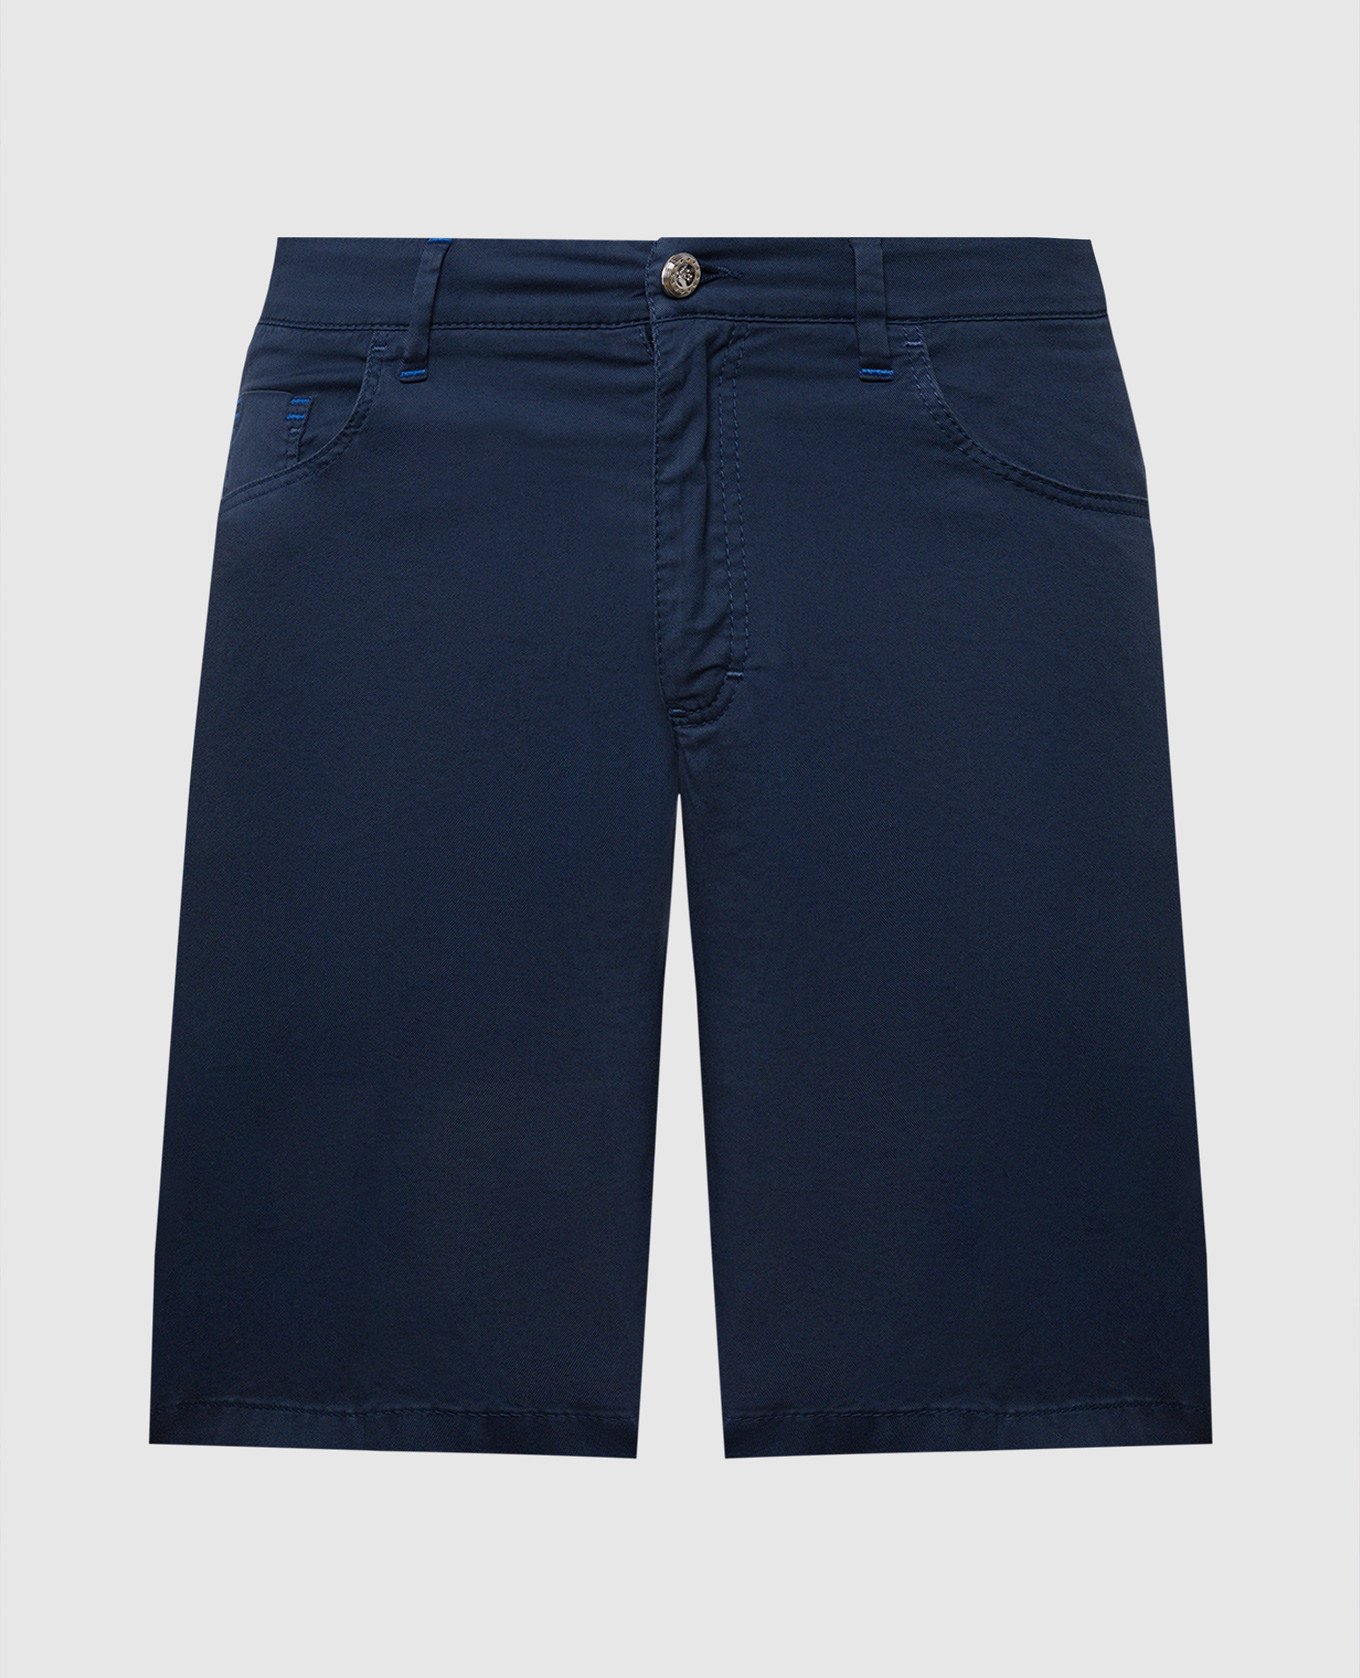 Blue shorts with embroidered logo emblem